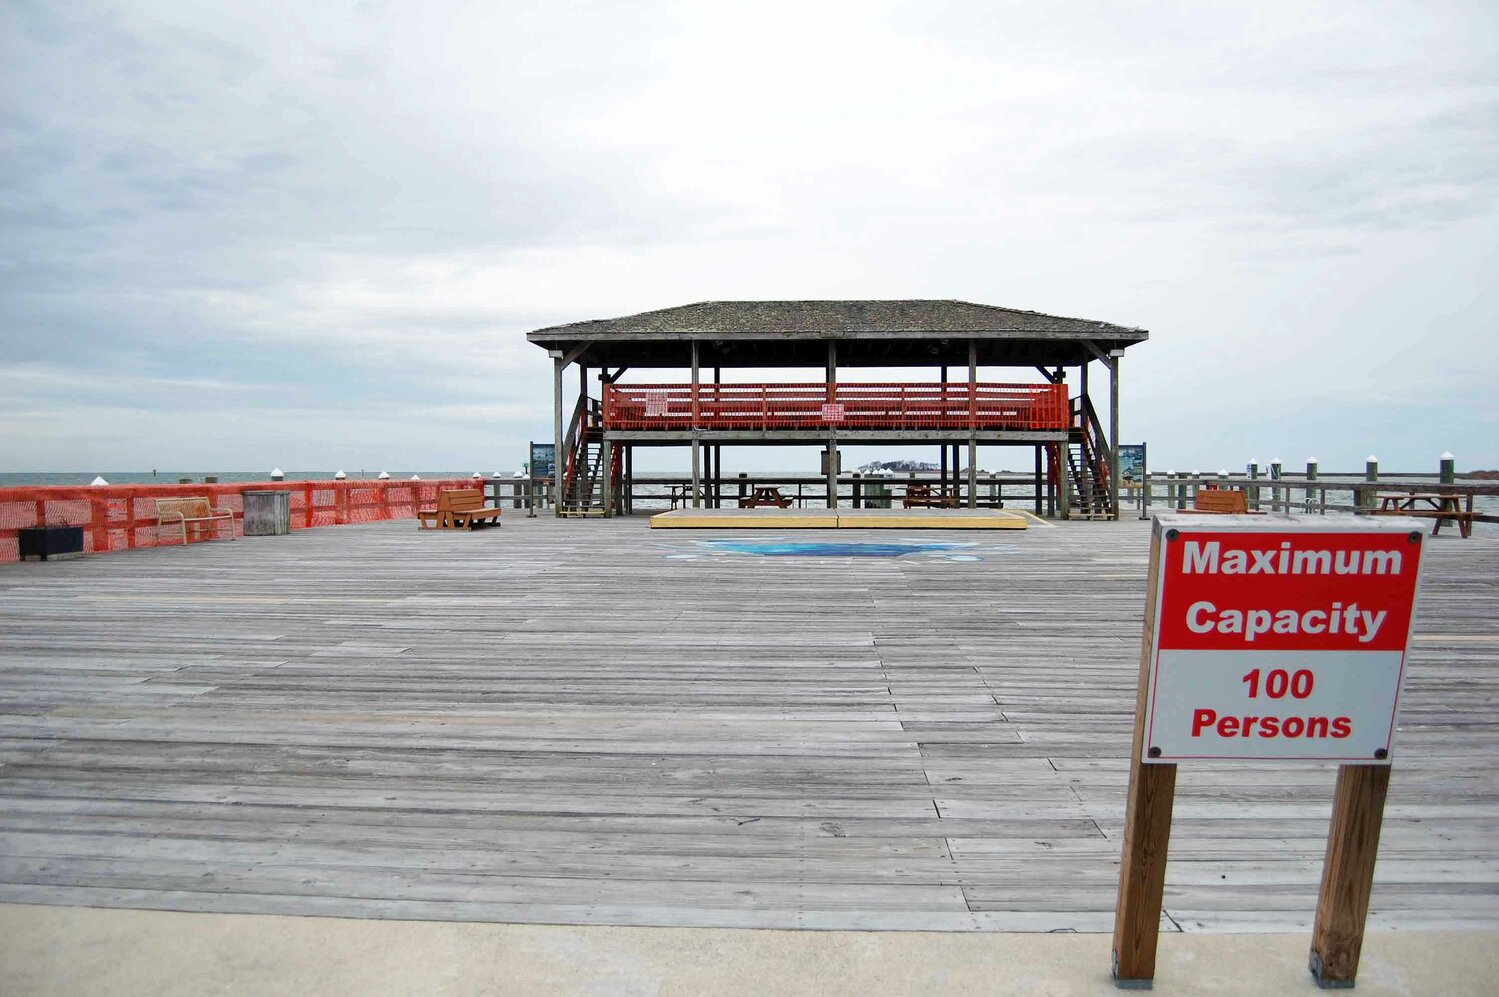 The Crisfield City Dock has been compromised in recent years by storms, and is due for repairs and improvements. When they occur, plans are that new venue and vendor space will be added with the planning and engineering for that covered by a newly-approved $100,000 state grant.